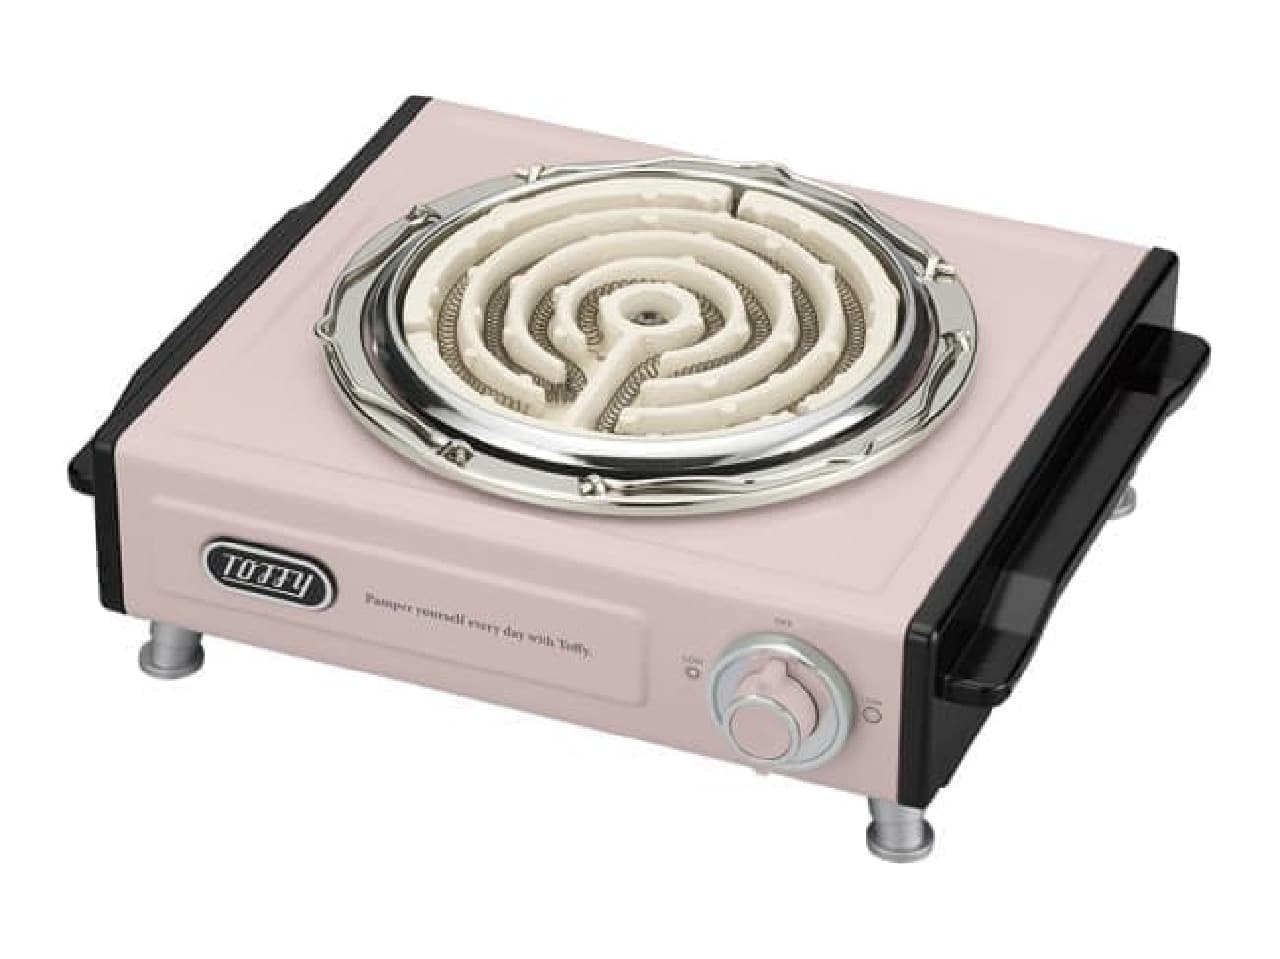 Compact "desktop electric stove" from Toffy--No gas cylinder required, no air pollution